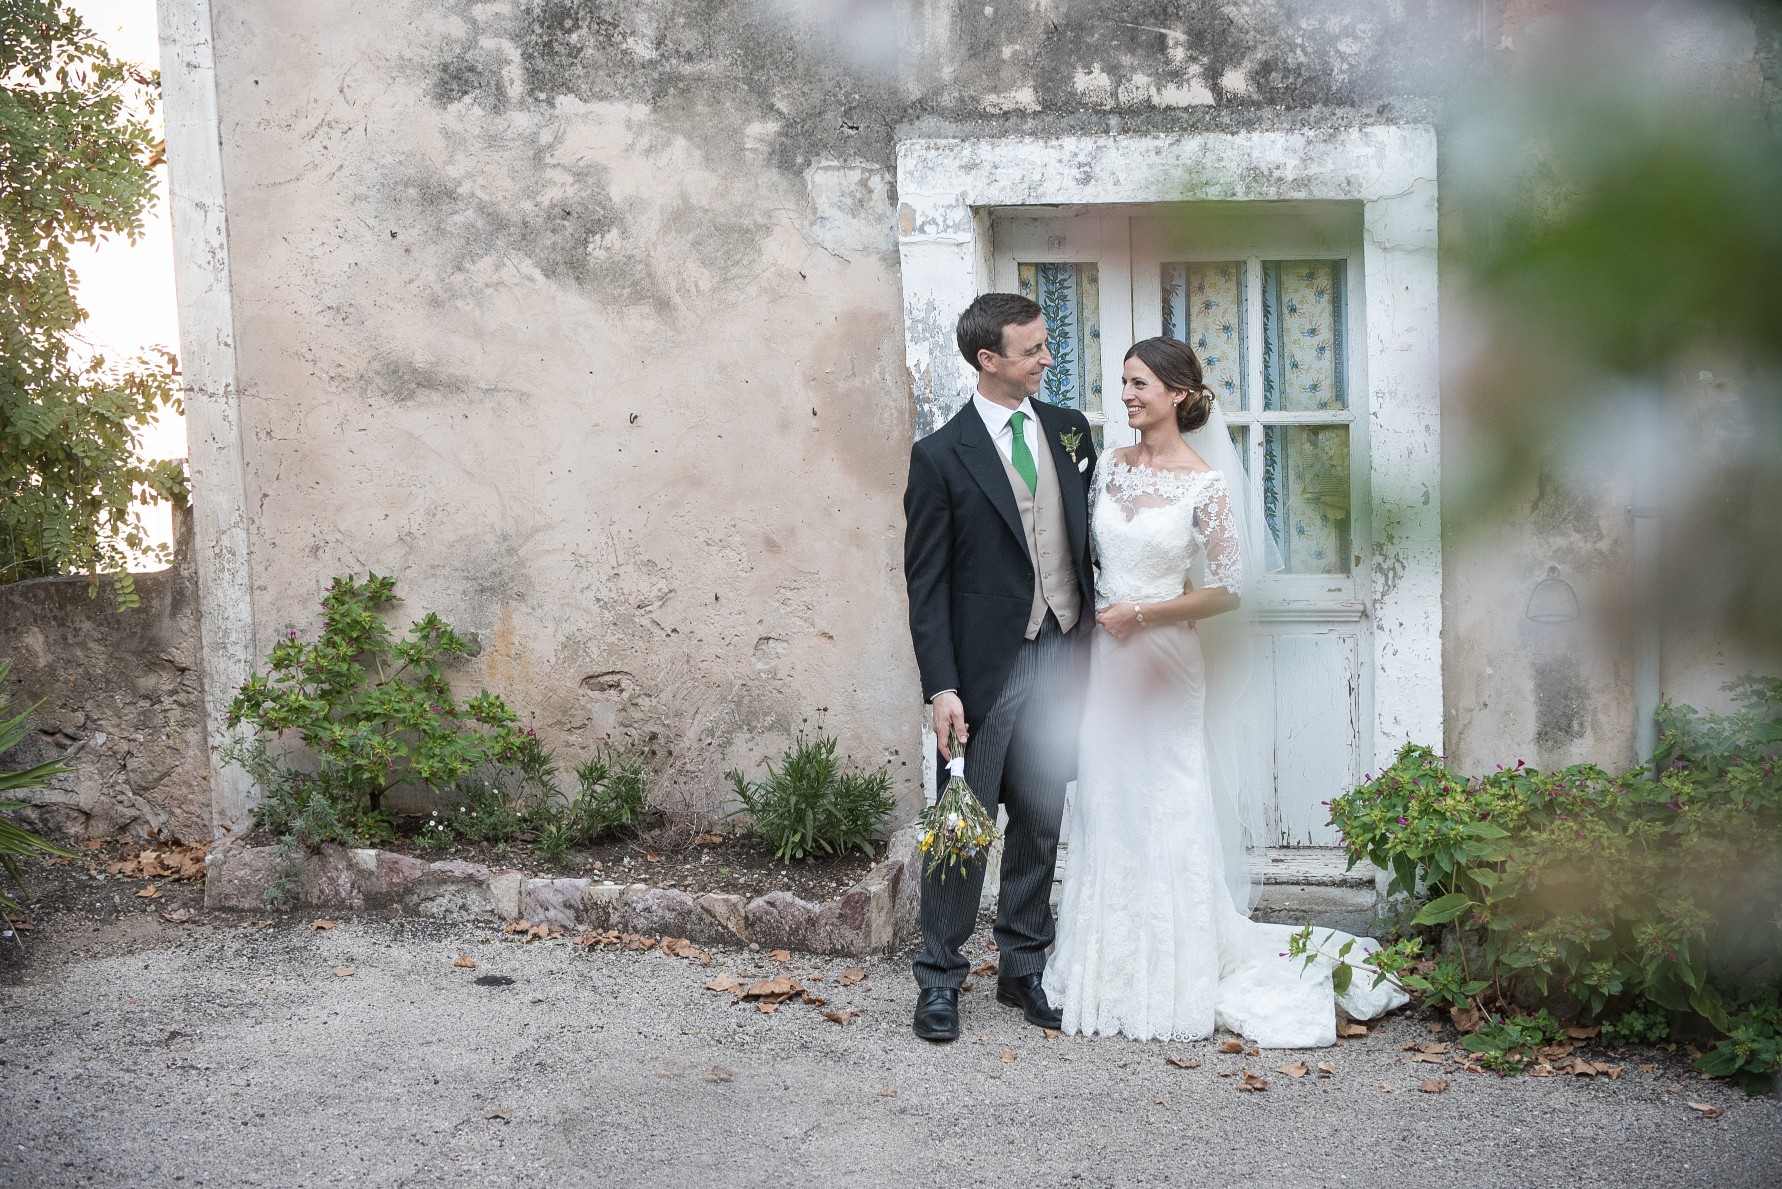 Wedding photography - South of France wedding - the bride and groom